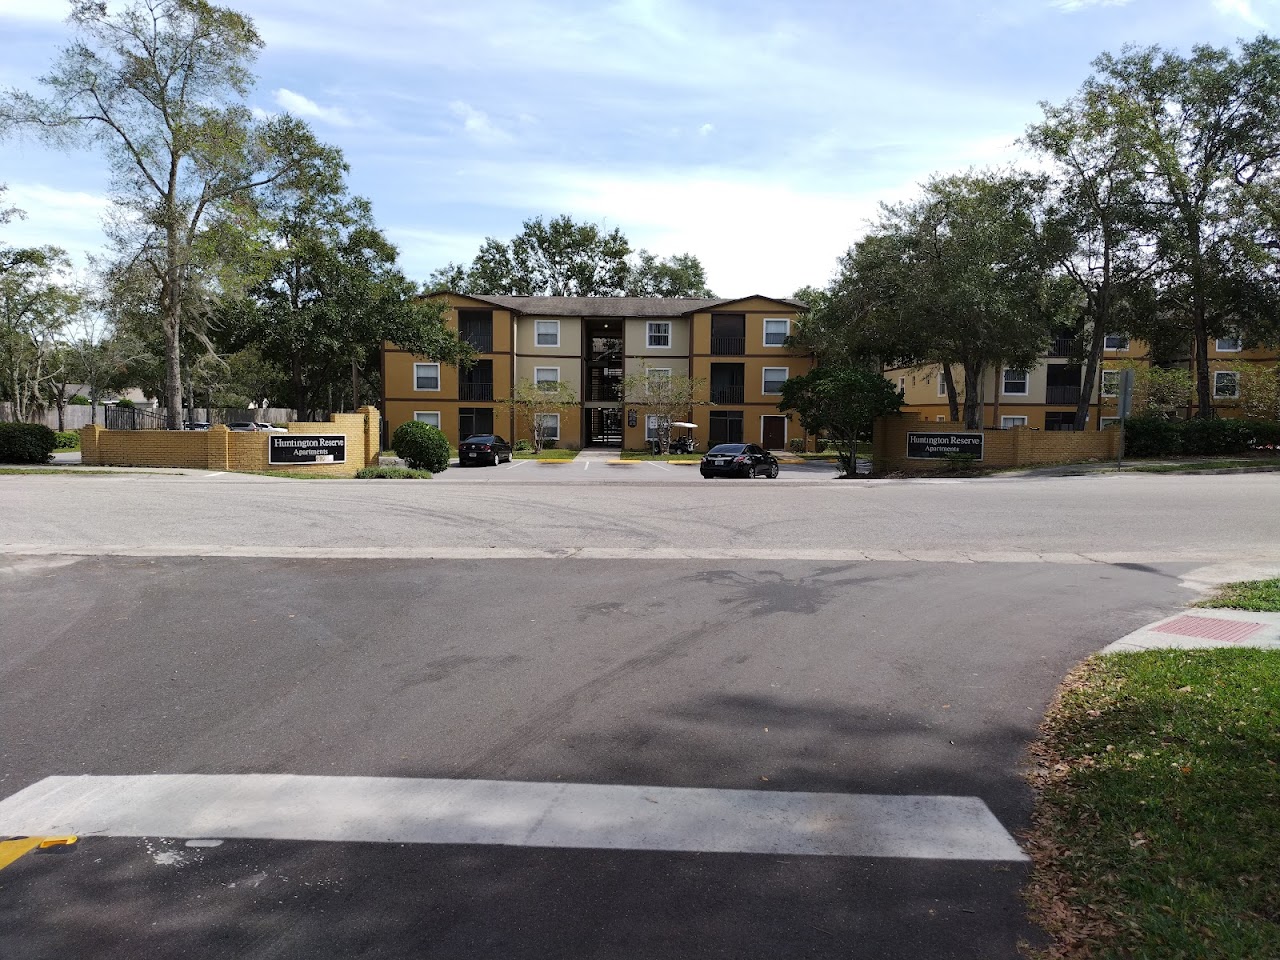 Photo of HUNTINGTON RESERVE. Affordable housing located at 111 ROSECLIFF CIRCLE SANFORD, FL 32773